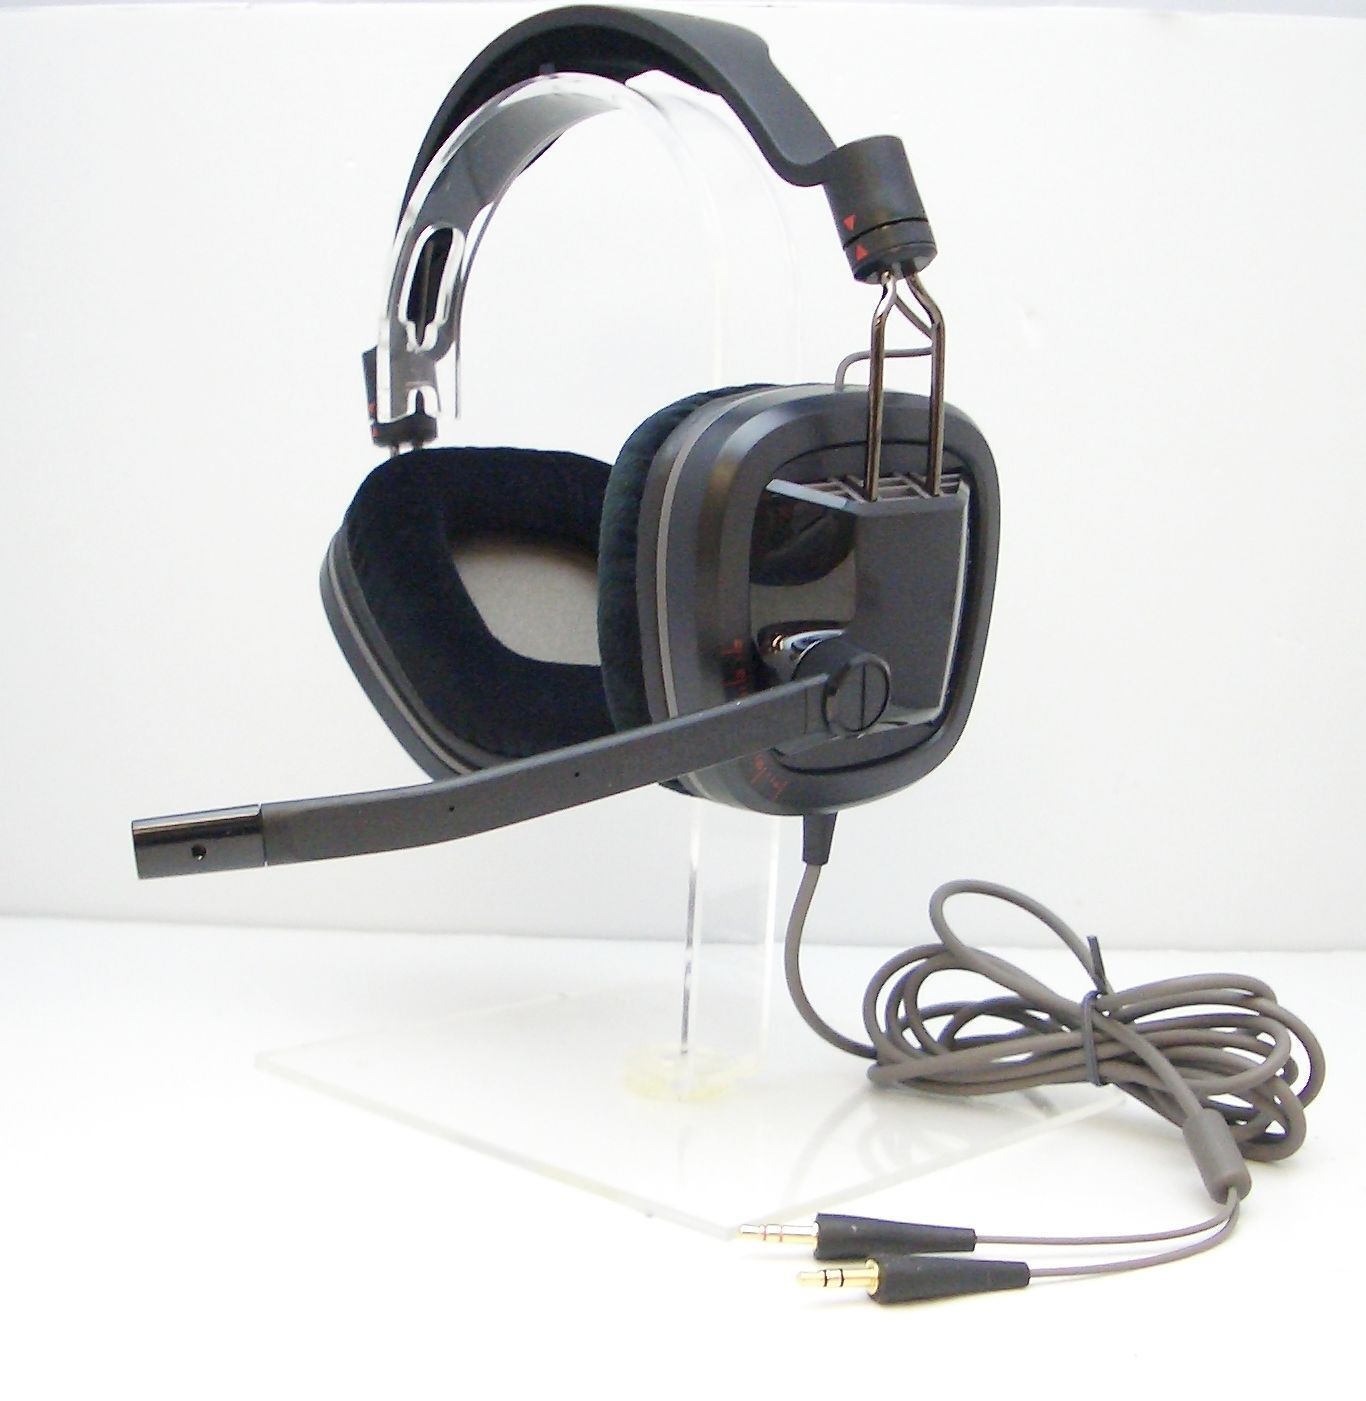 Plantronics GameCom 380 Wired 40 mm Stereo Over-the-head Circumaural PC Headset 